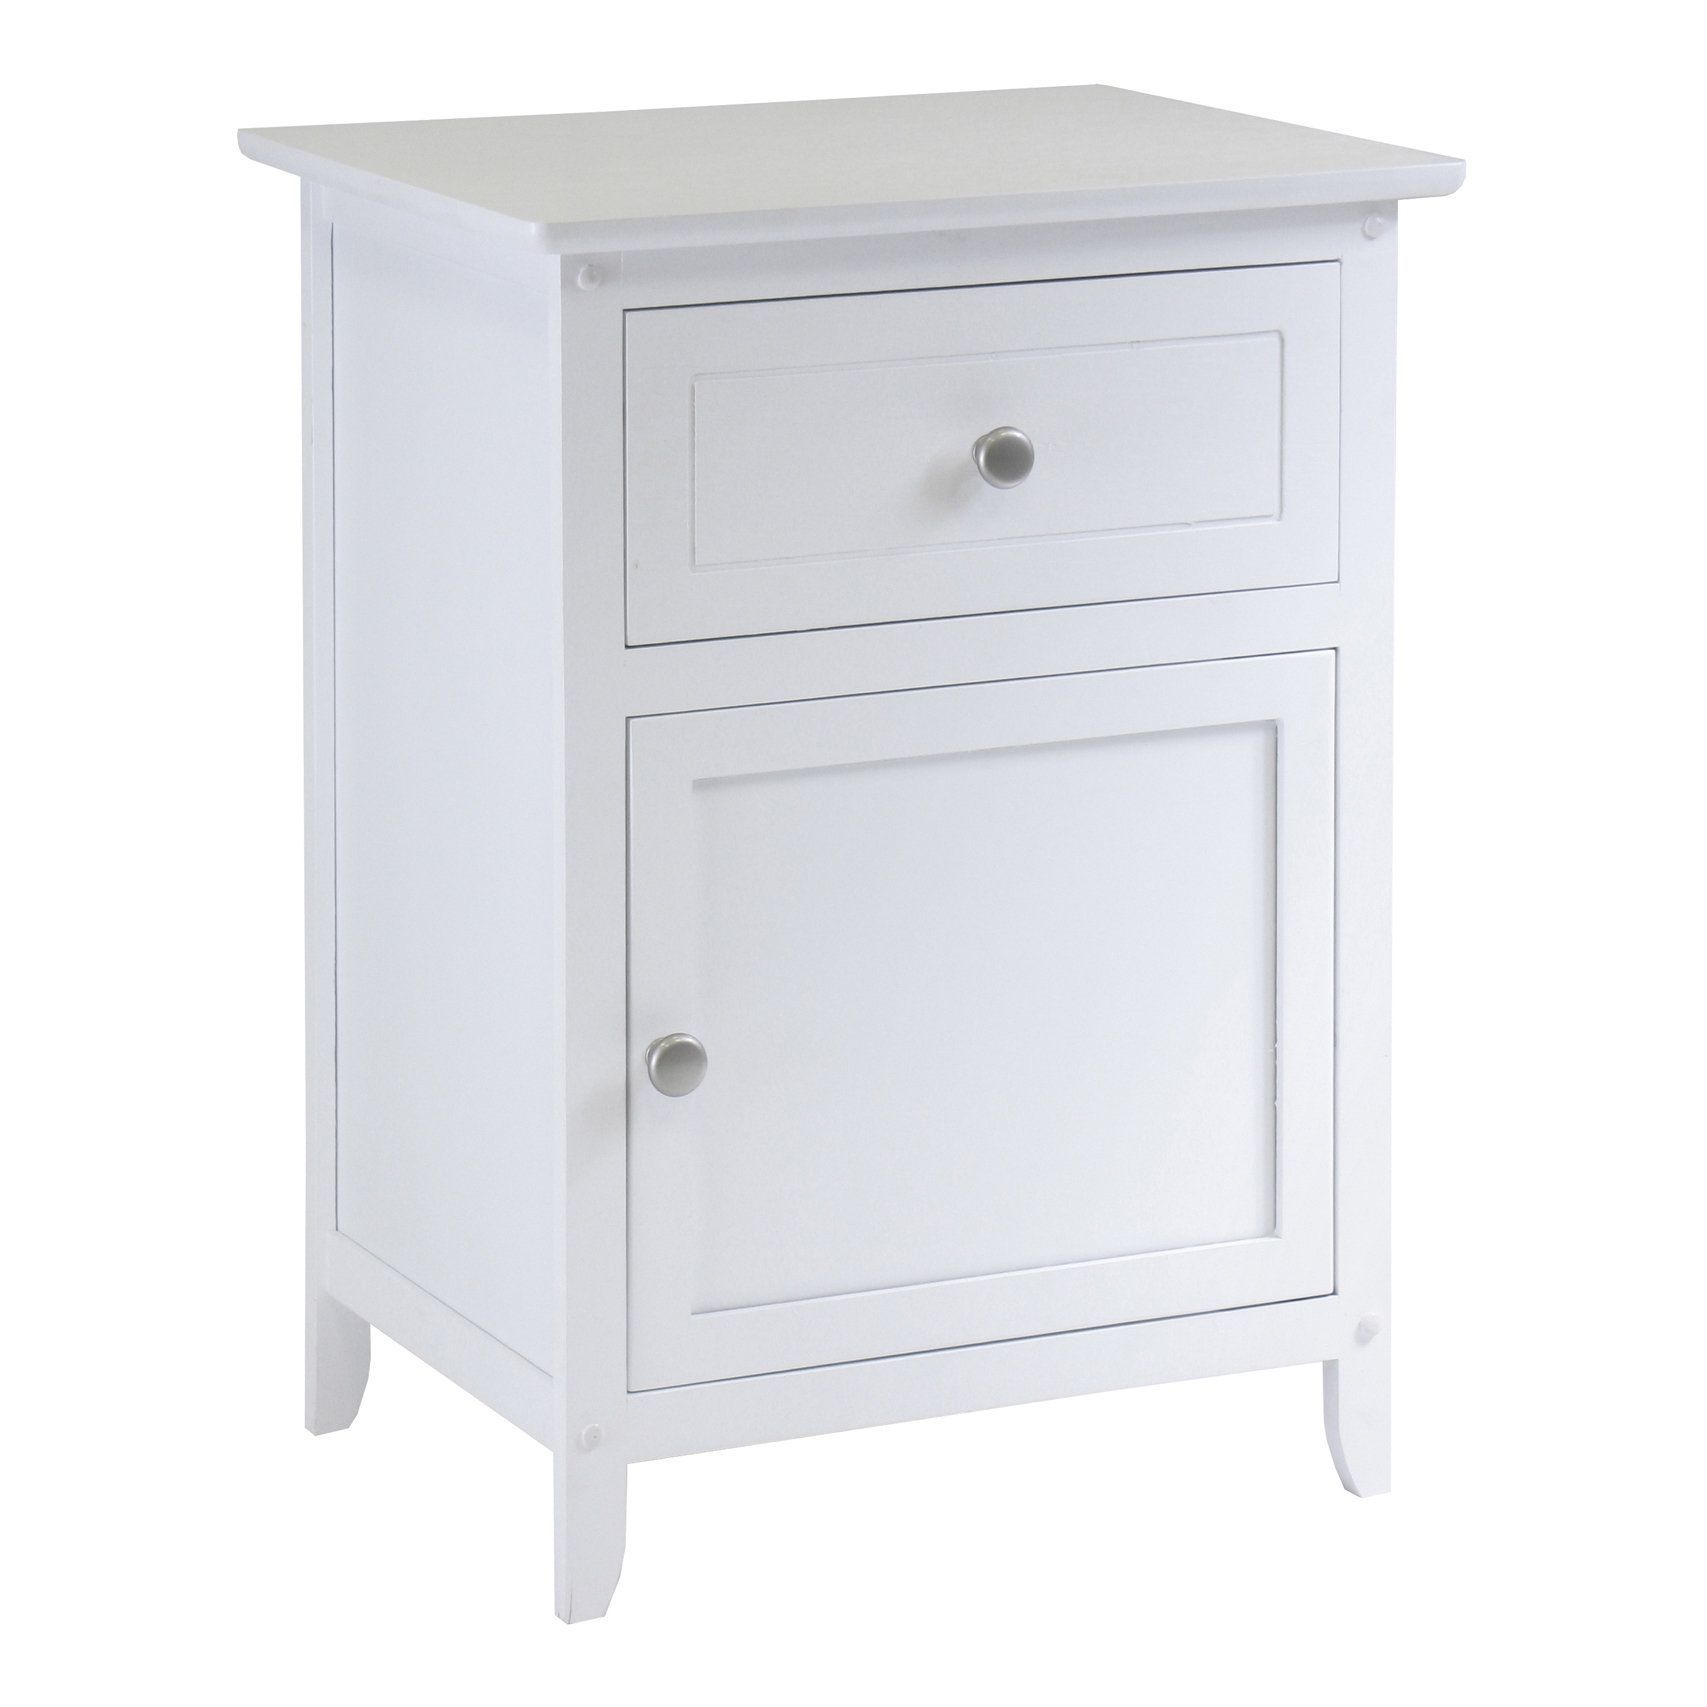 winsome eugene night stand accent table with drawer cabinet black ping bedding furniture electronics jewelry clothing more standaccent tablesdrawermaster white and brown side